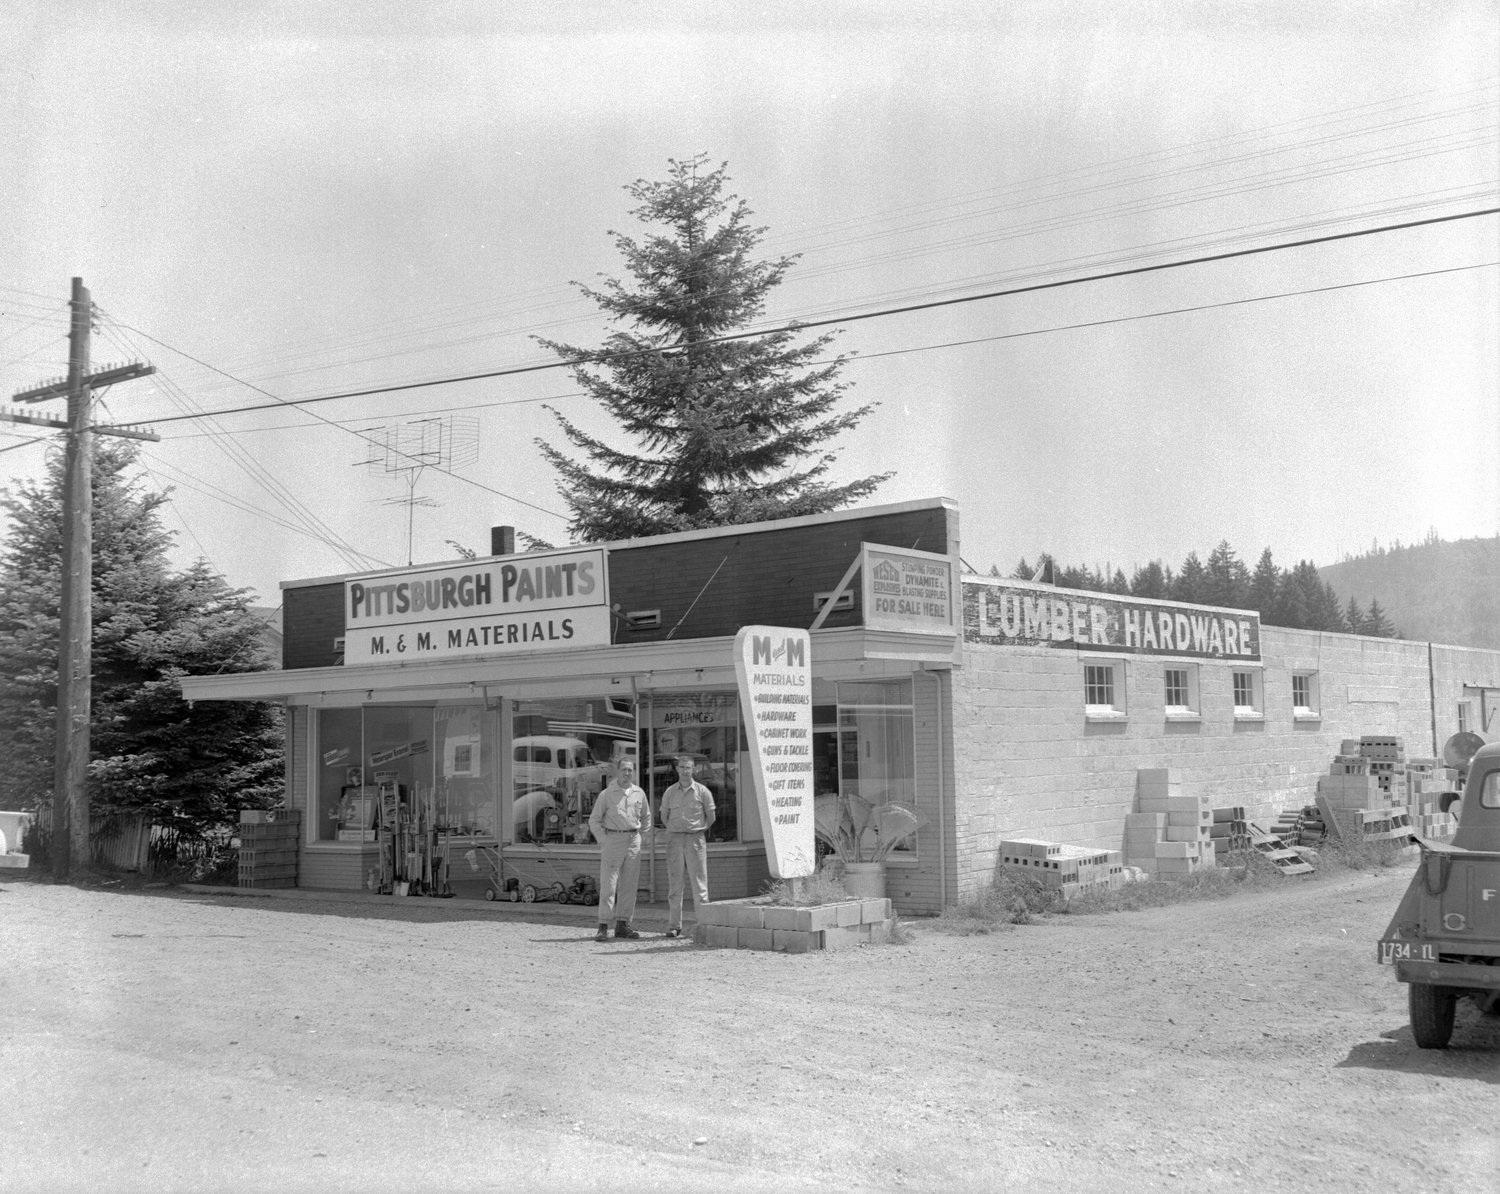 In 1956, a Chronicle newsroom staffer traveled to Mossyrock to collect dozens of photographs of area people and businesses. These photos were recently digitized from film in The Chronicle’s archives.